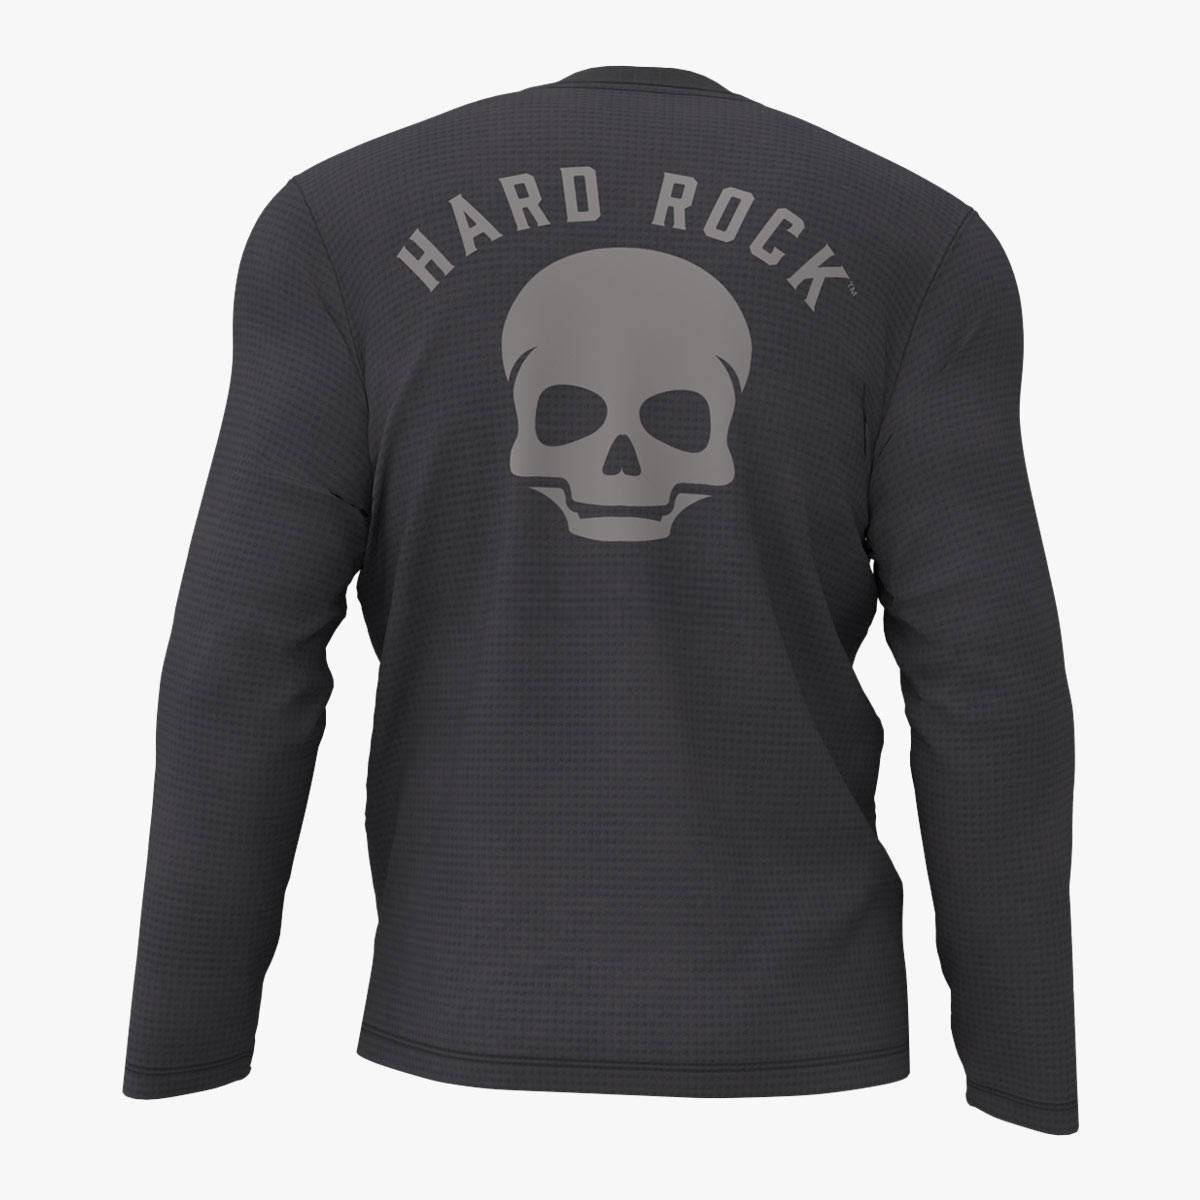 Guitar Company Adult Thermal in Black with Skull image number 1